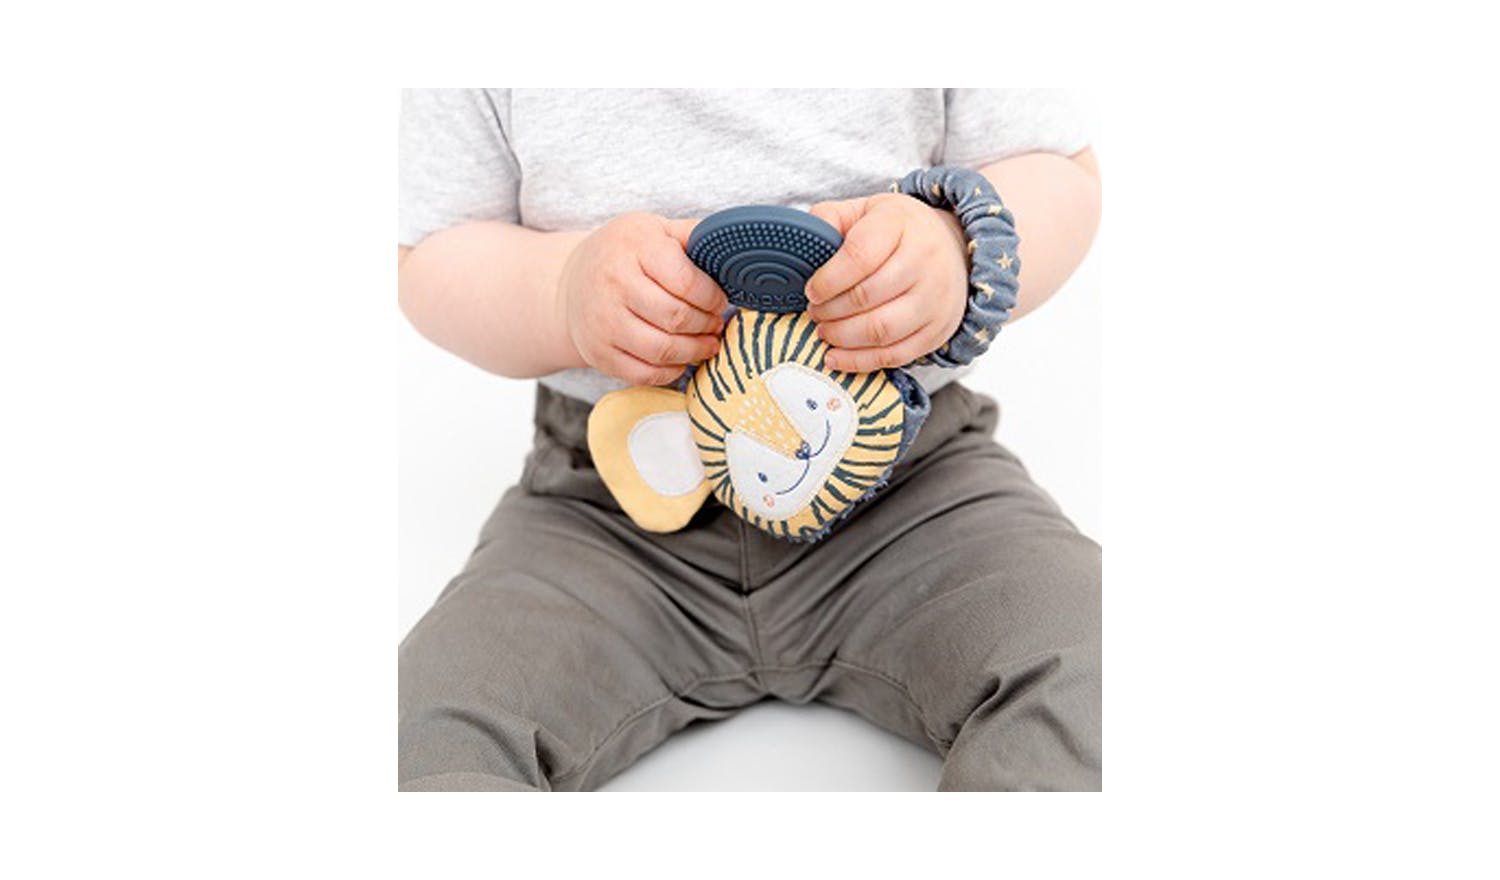 Cheeky Chompers Handychew Baby Teething Toy - Bertie the Lion